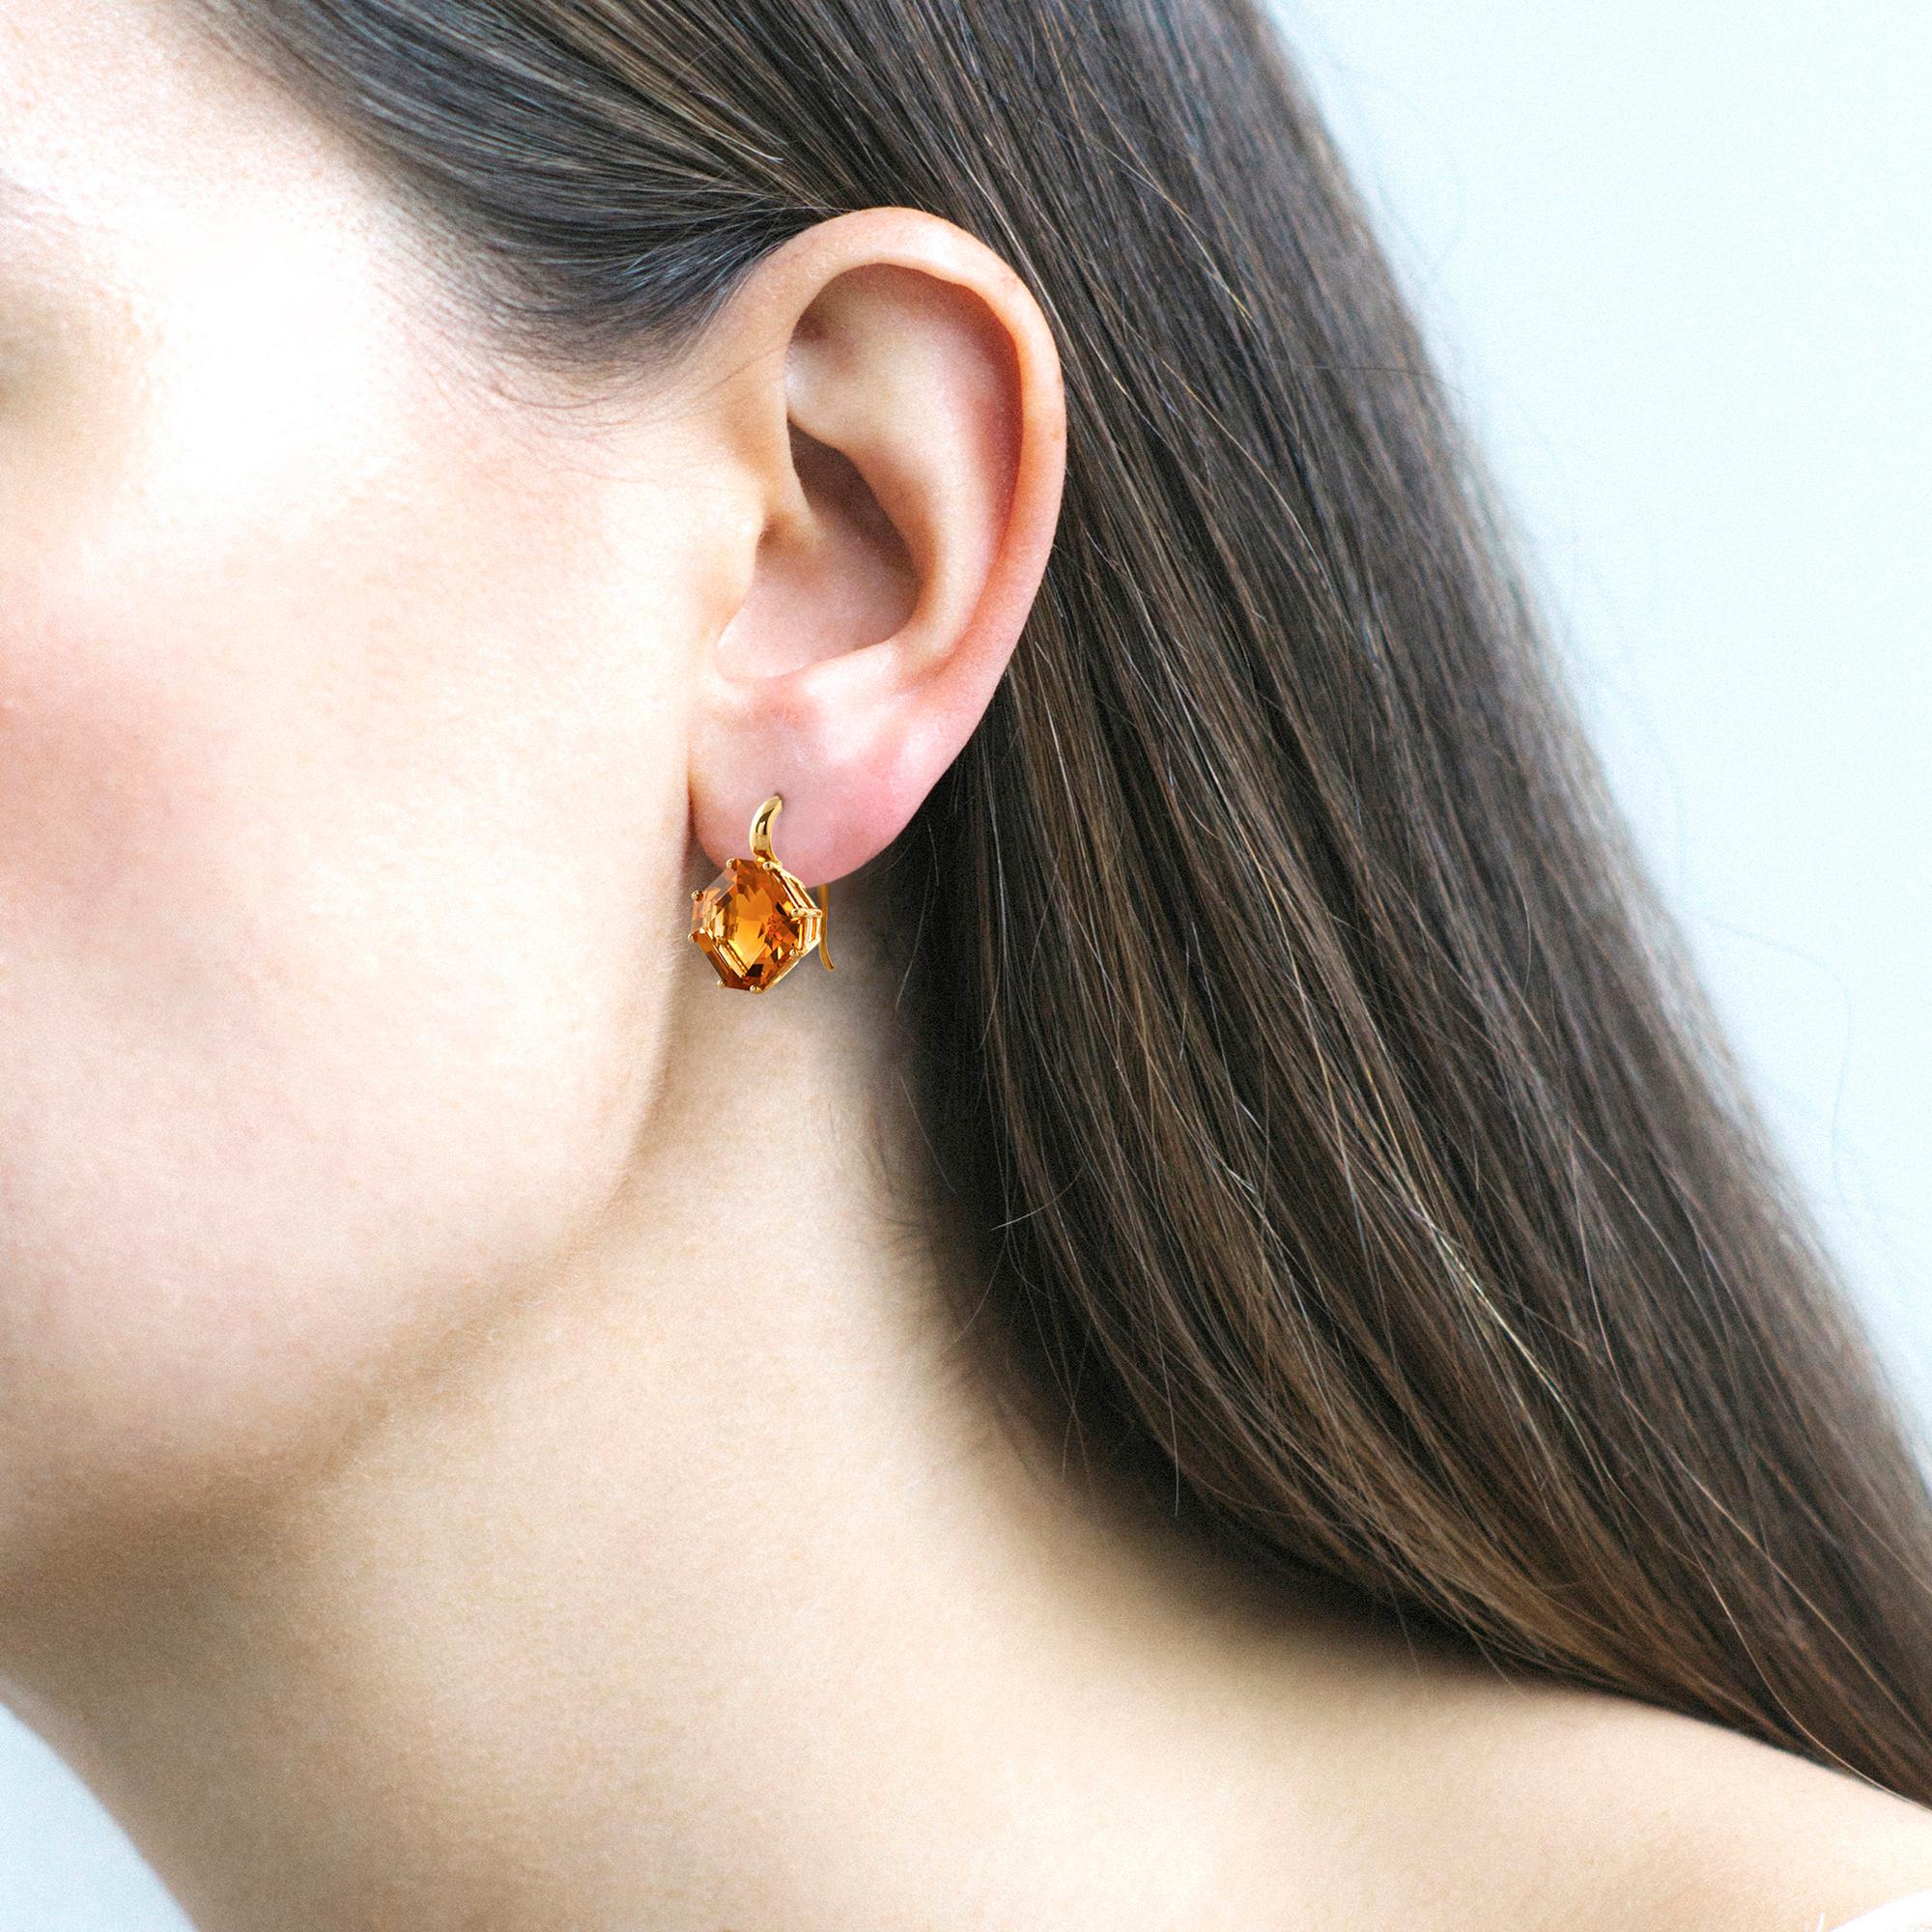 Citrine Square Emerald Cut Earrings on French Wire in 18K Yellow Gold, from 'Gossip' Collection

Stone size: 12 x 12 mm
